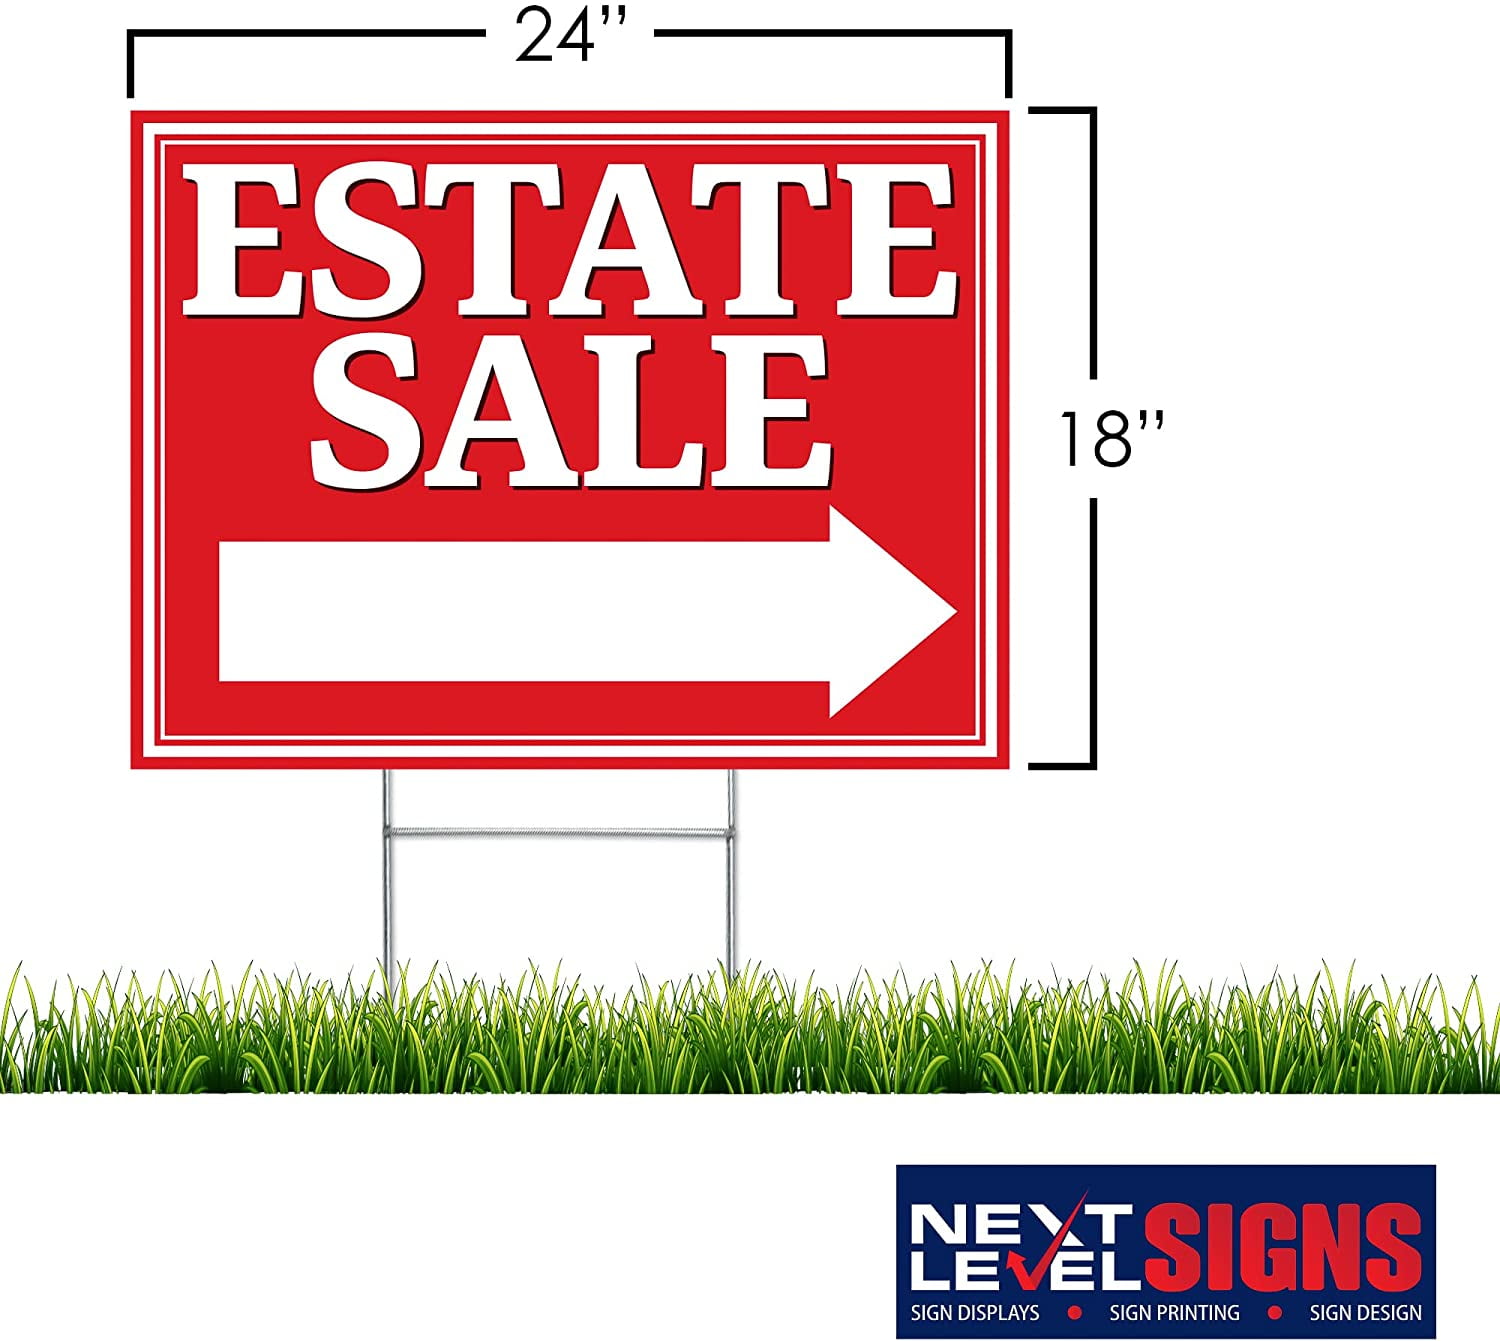 NEXT LEVEL SIGNS Estate Sale Yard Signs 24 W x 18 H Inches Metal  Ground Step H-Stake 24